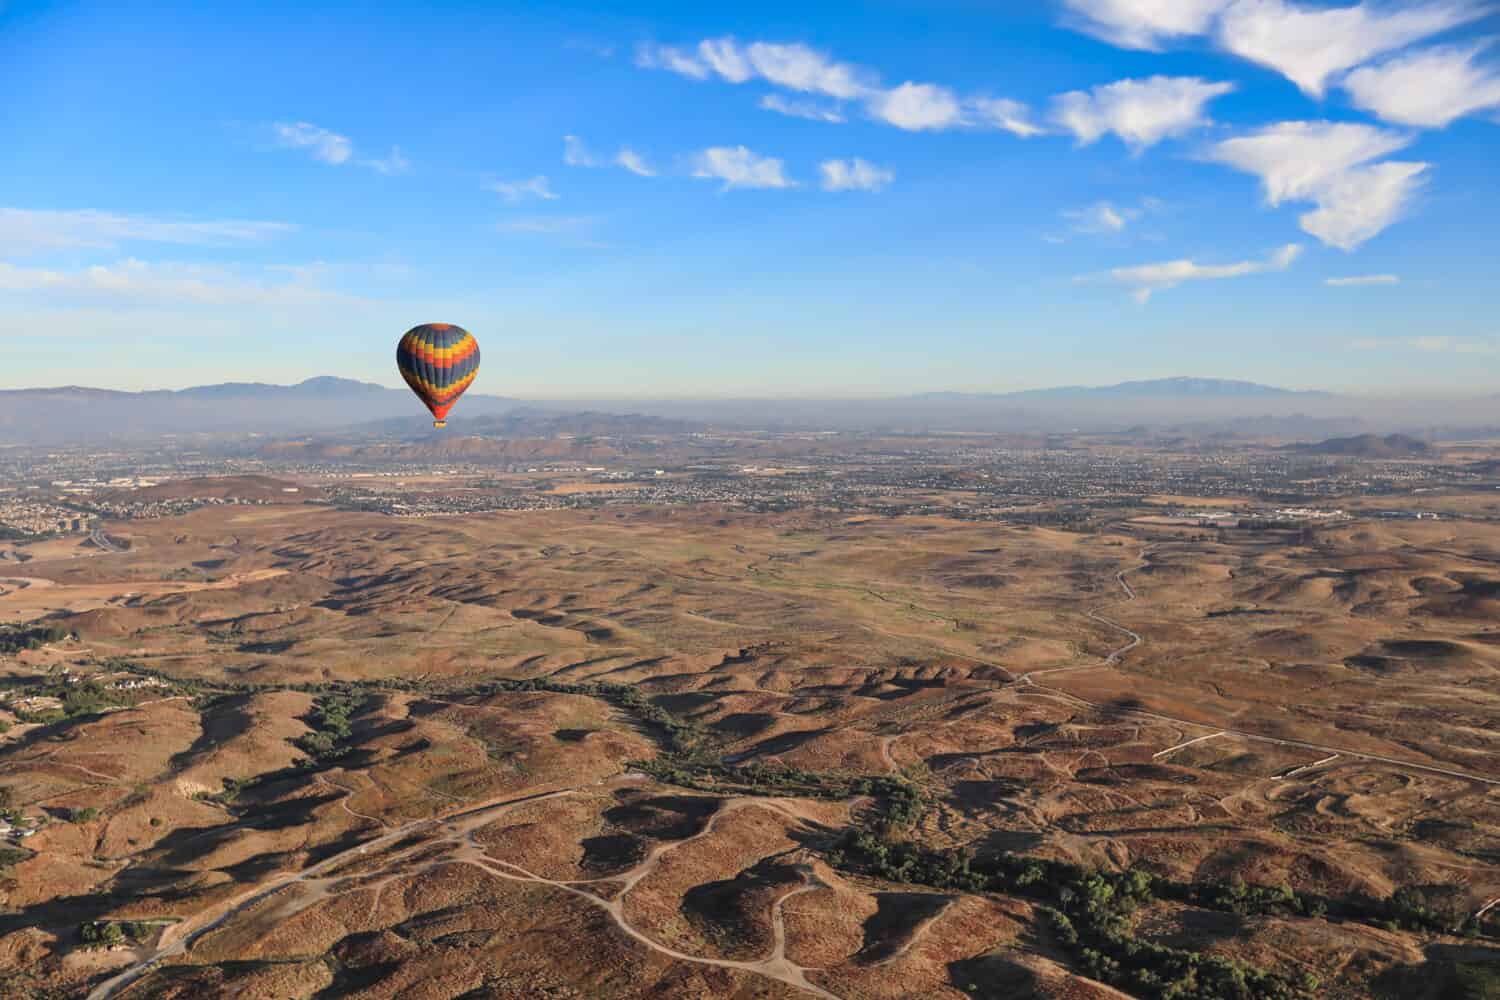 Hot air balloons fly over the grape vineyards in Temecula, California. This is a popular tourist attraction in this vacation tourism area.